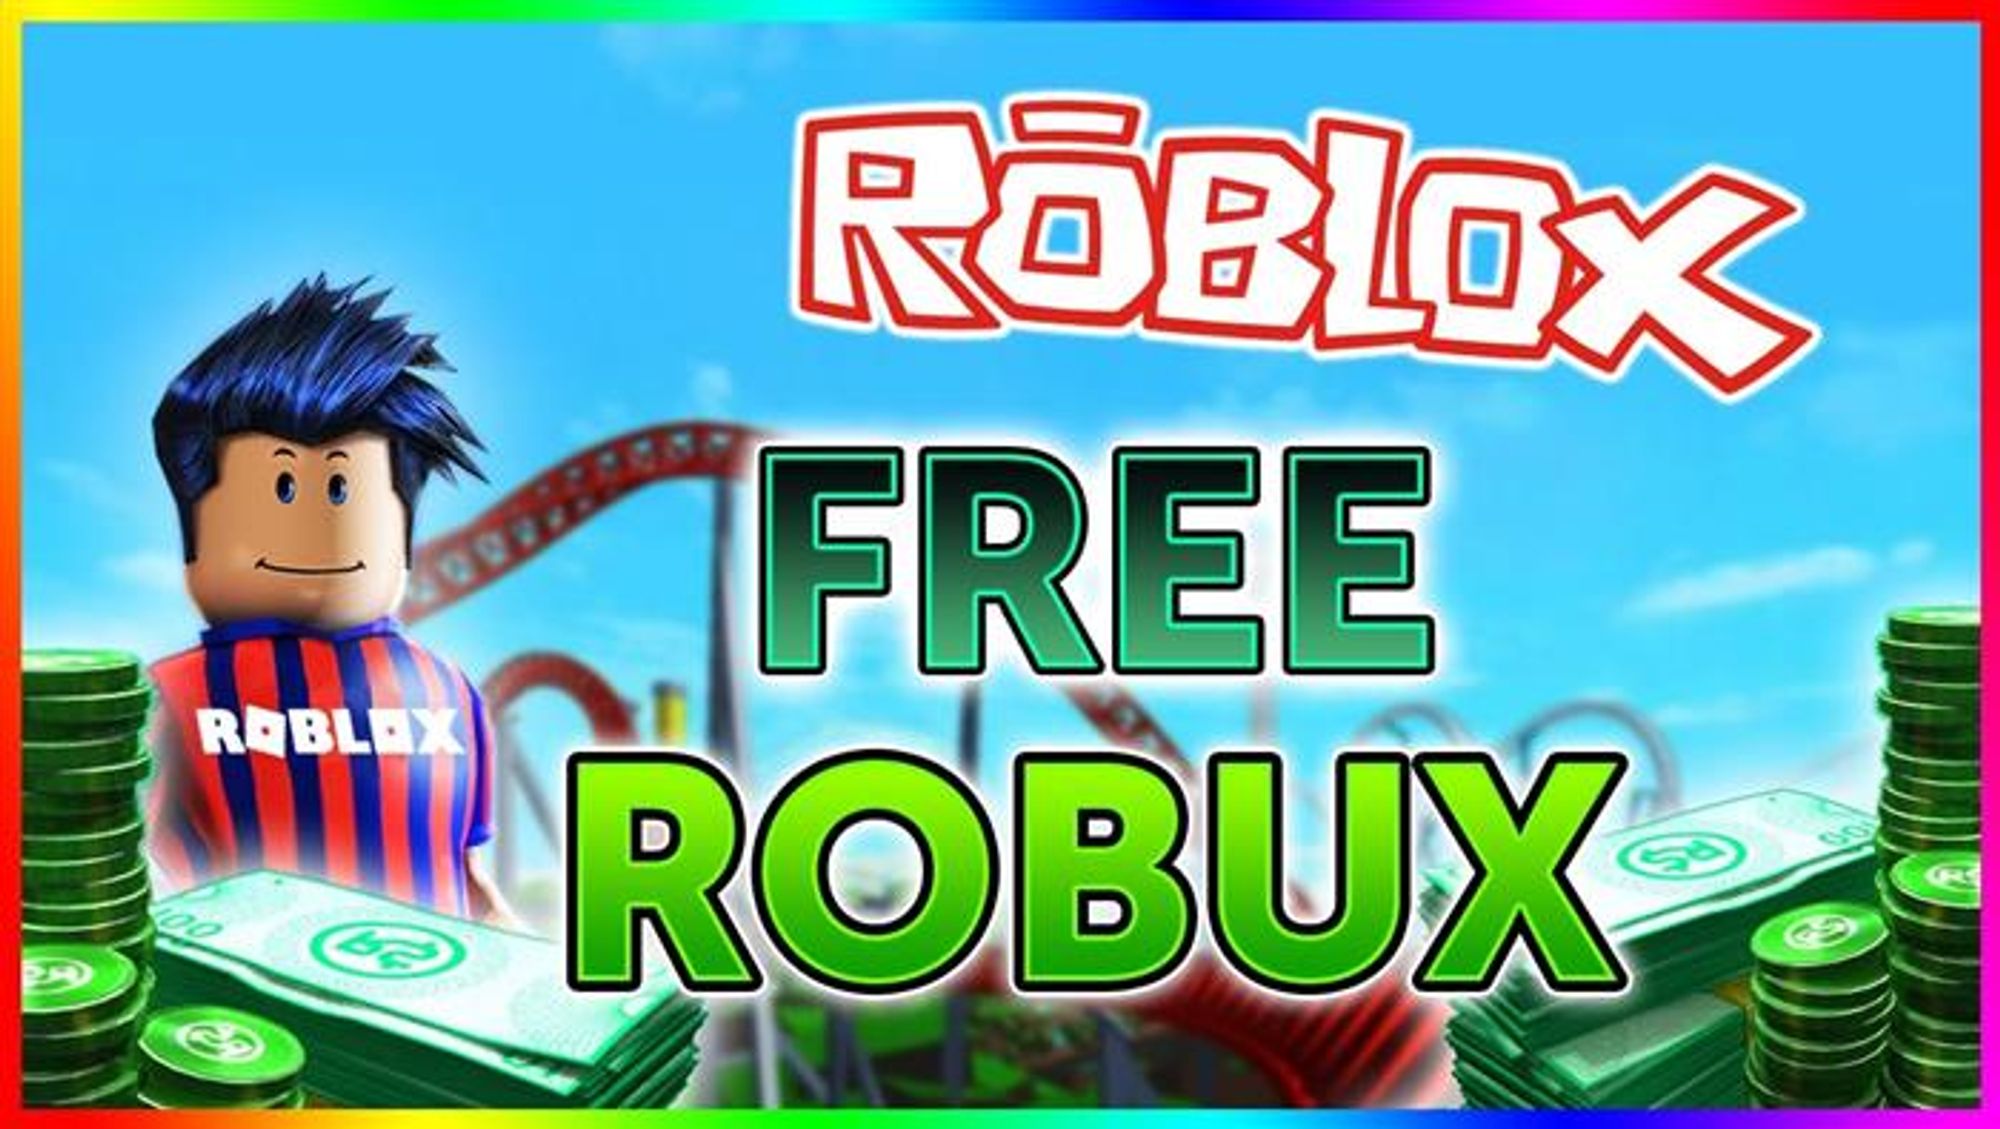 How To Get Free Robux By Playing This Game 2018